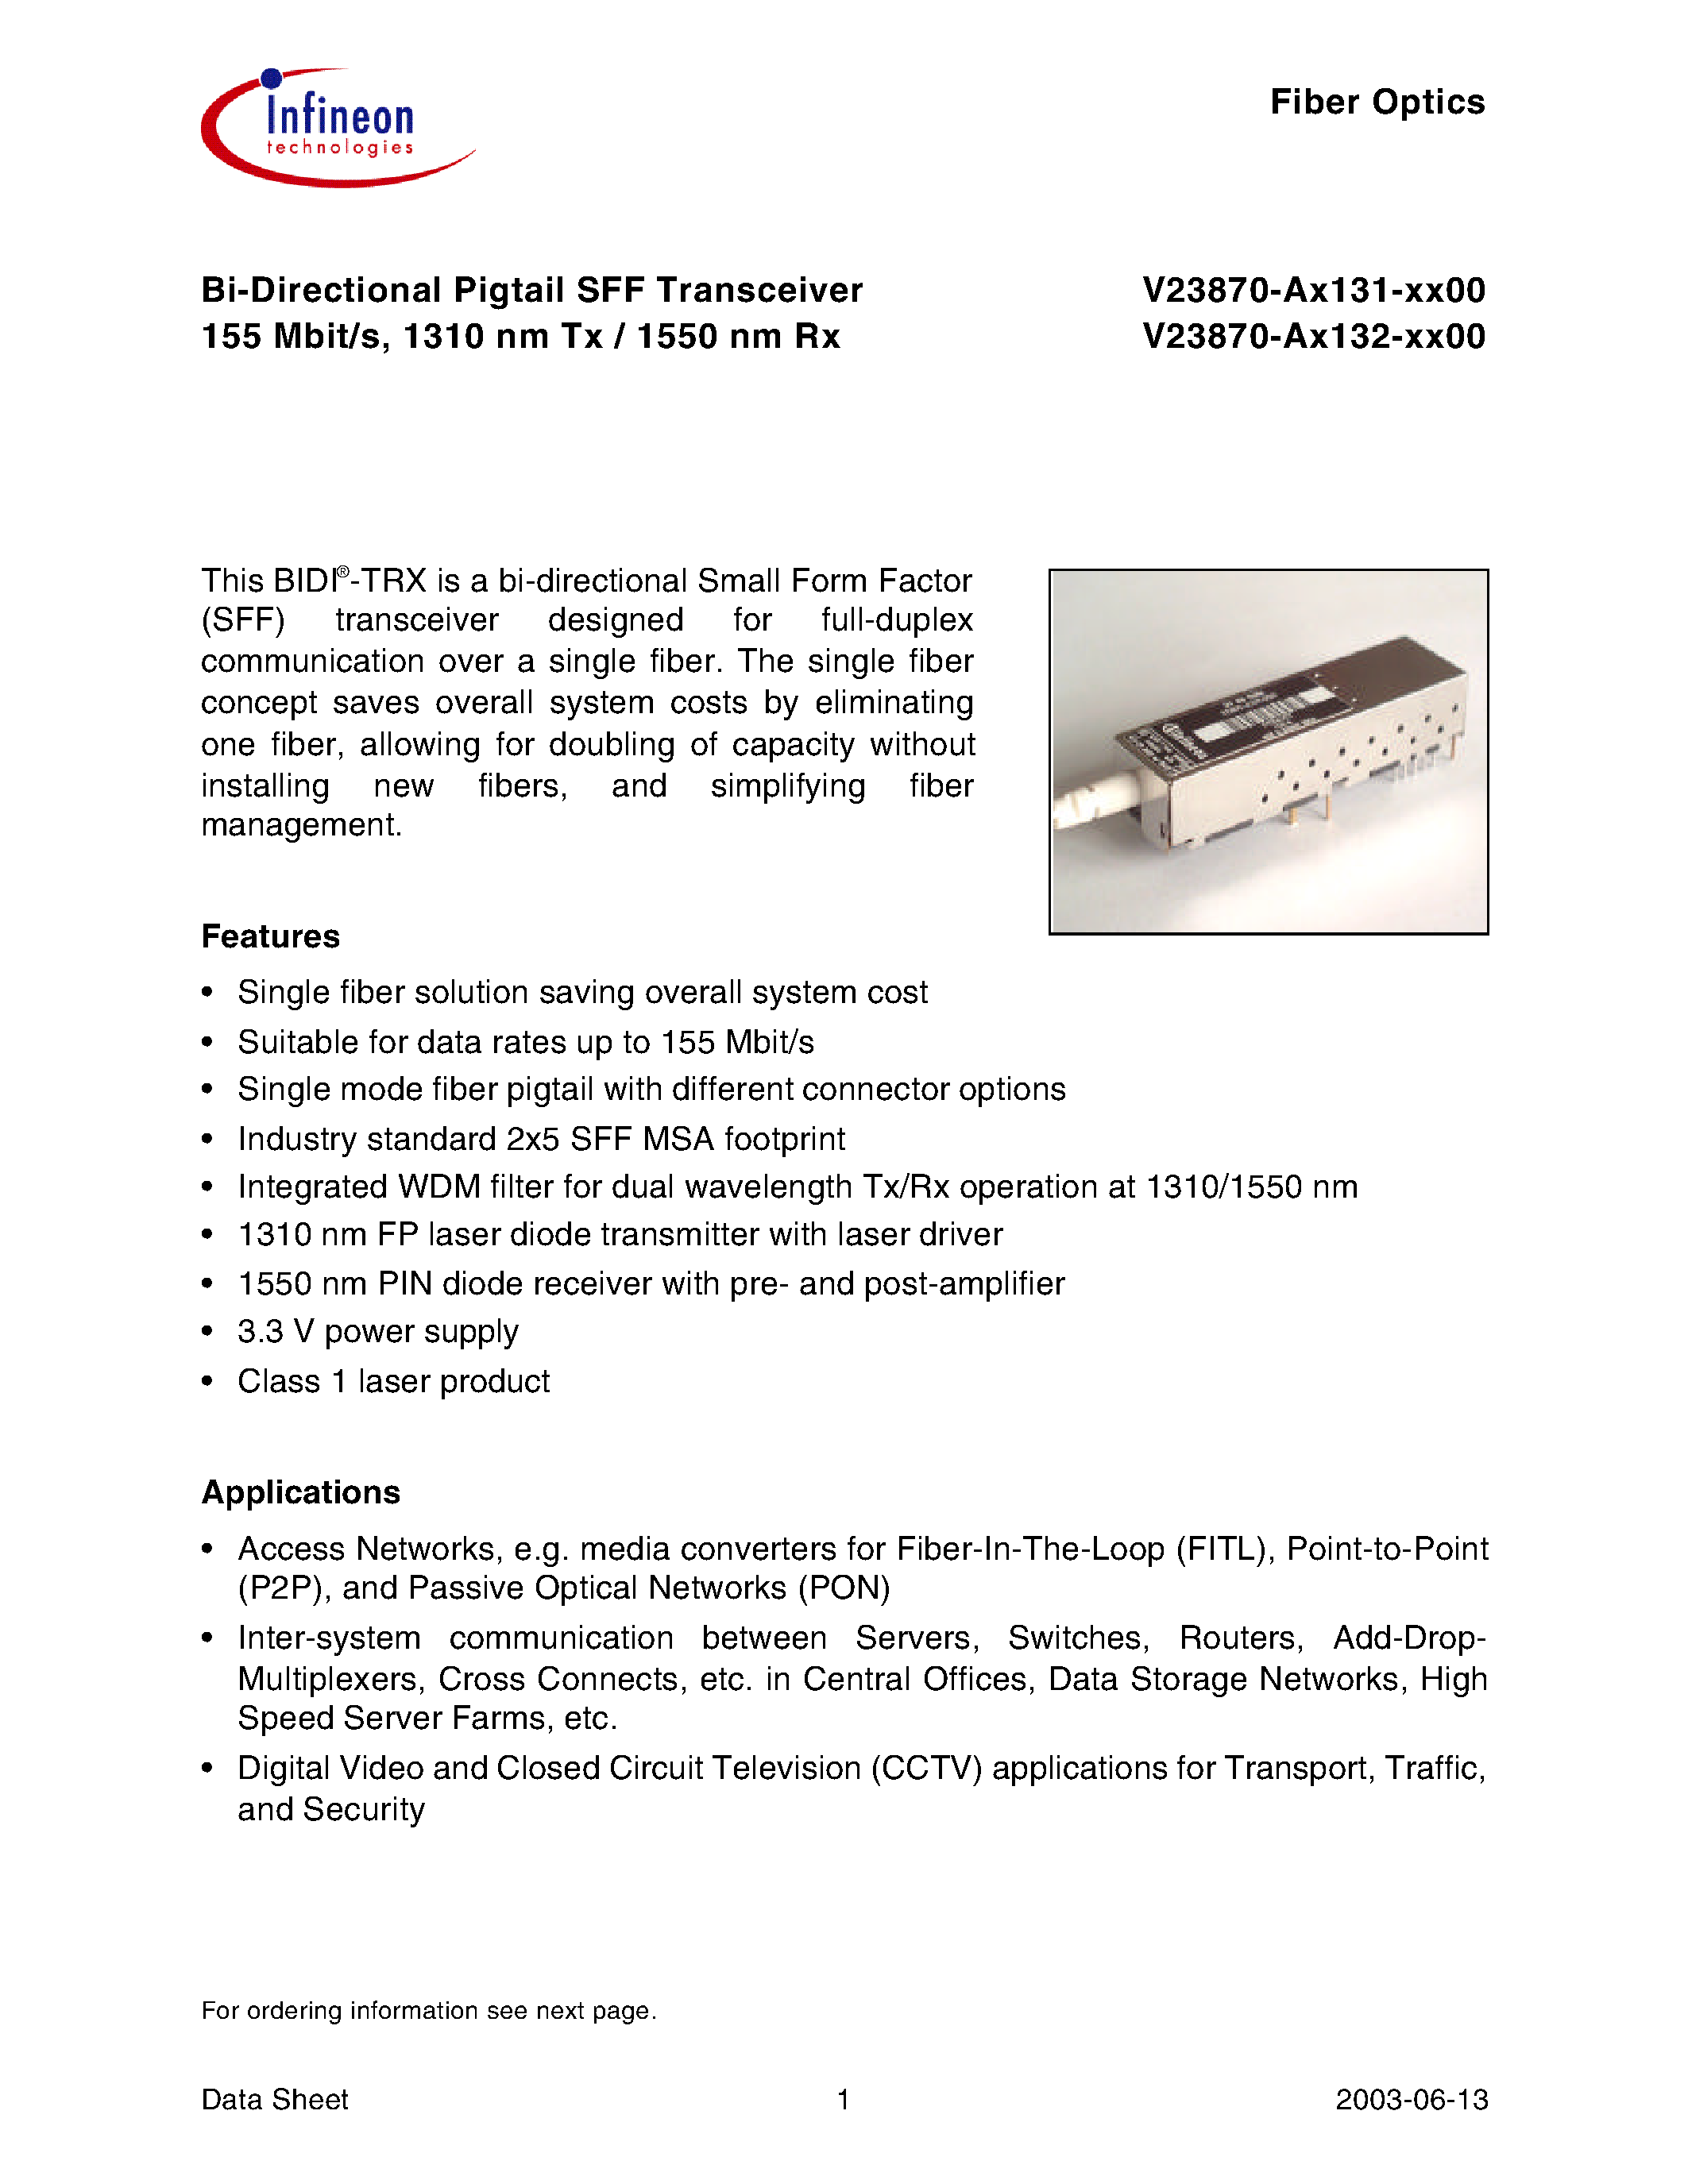 Datasheet V23870-A3131-B200 - Bi-Directional Pigtail SFF Transceiver 155 Mbit/s/ 1310 nm Tx / 1550 nm Rx page 1